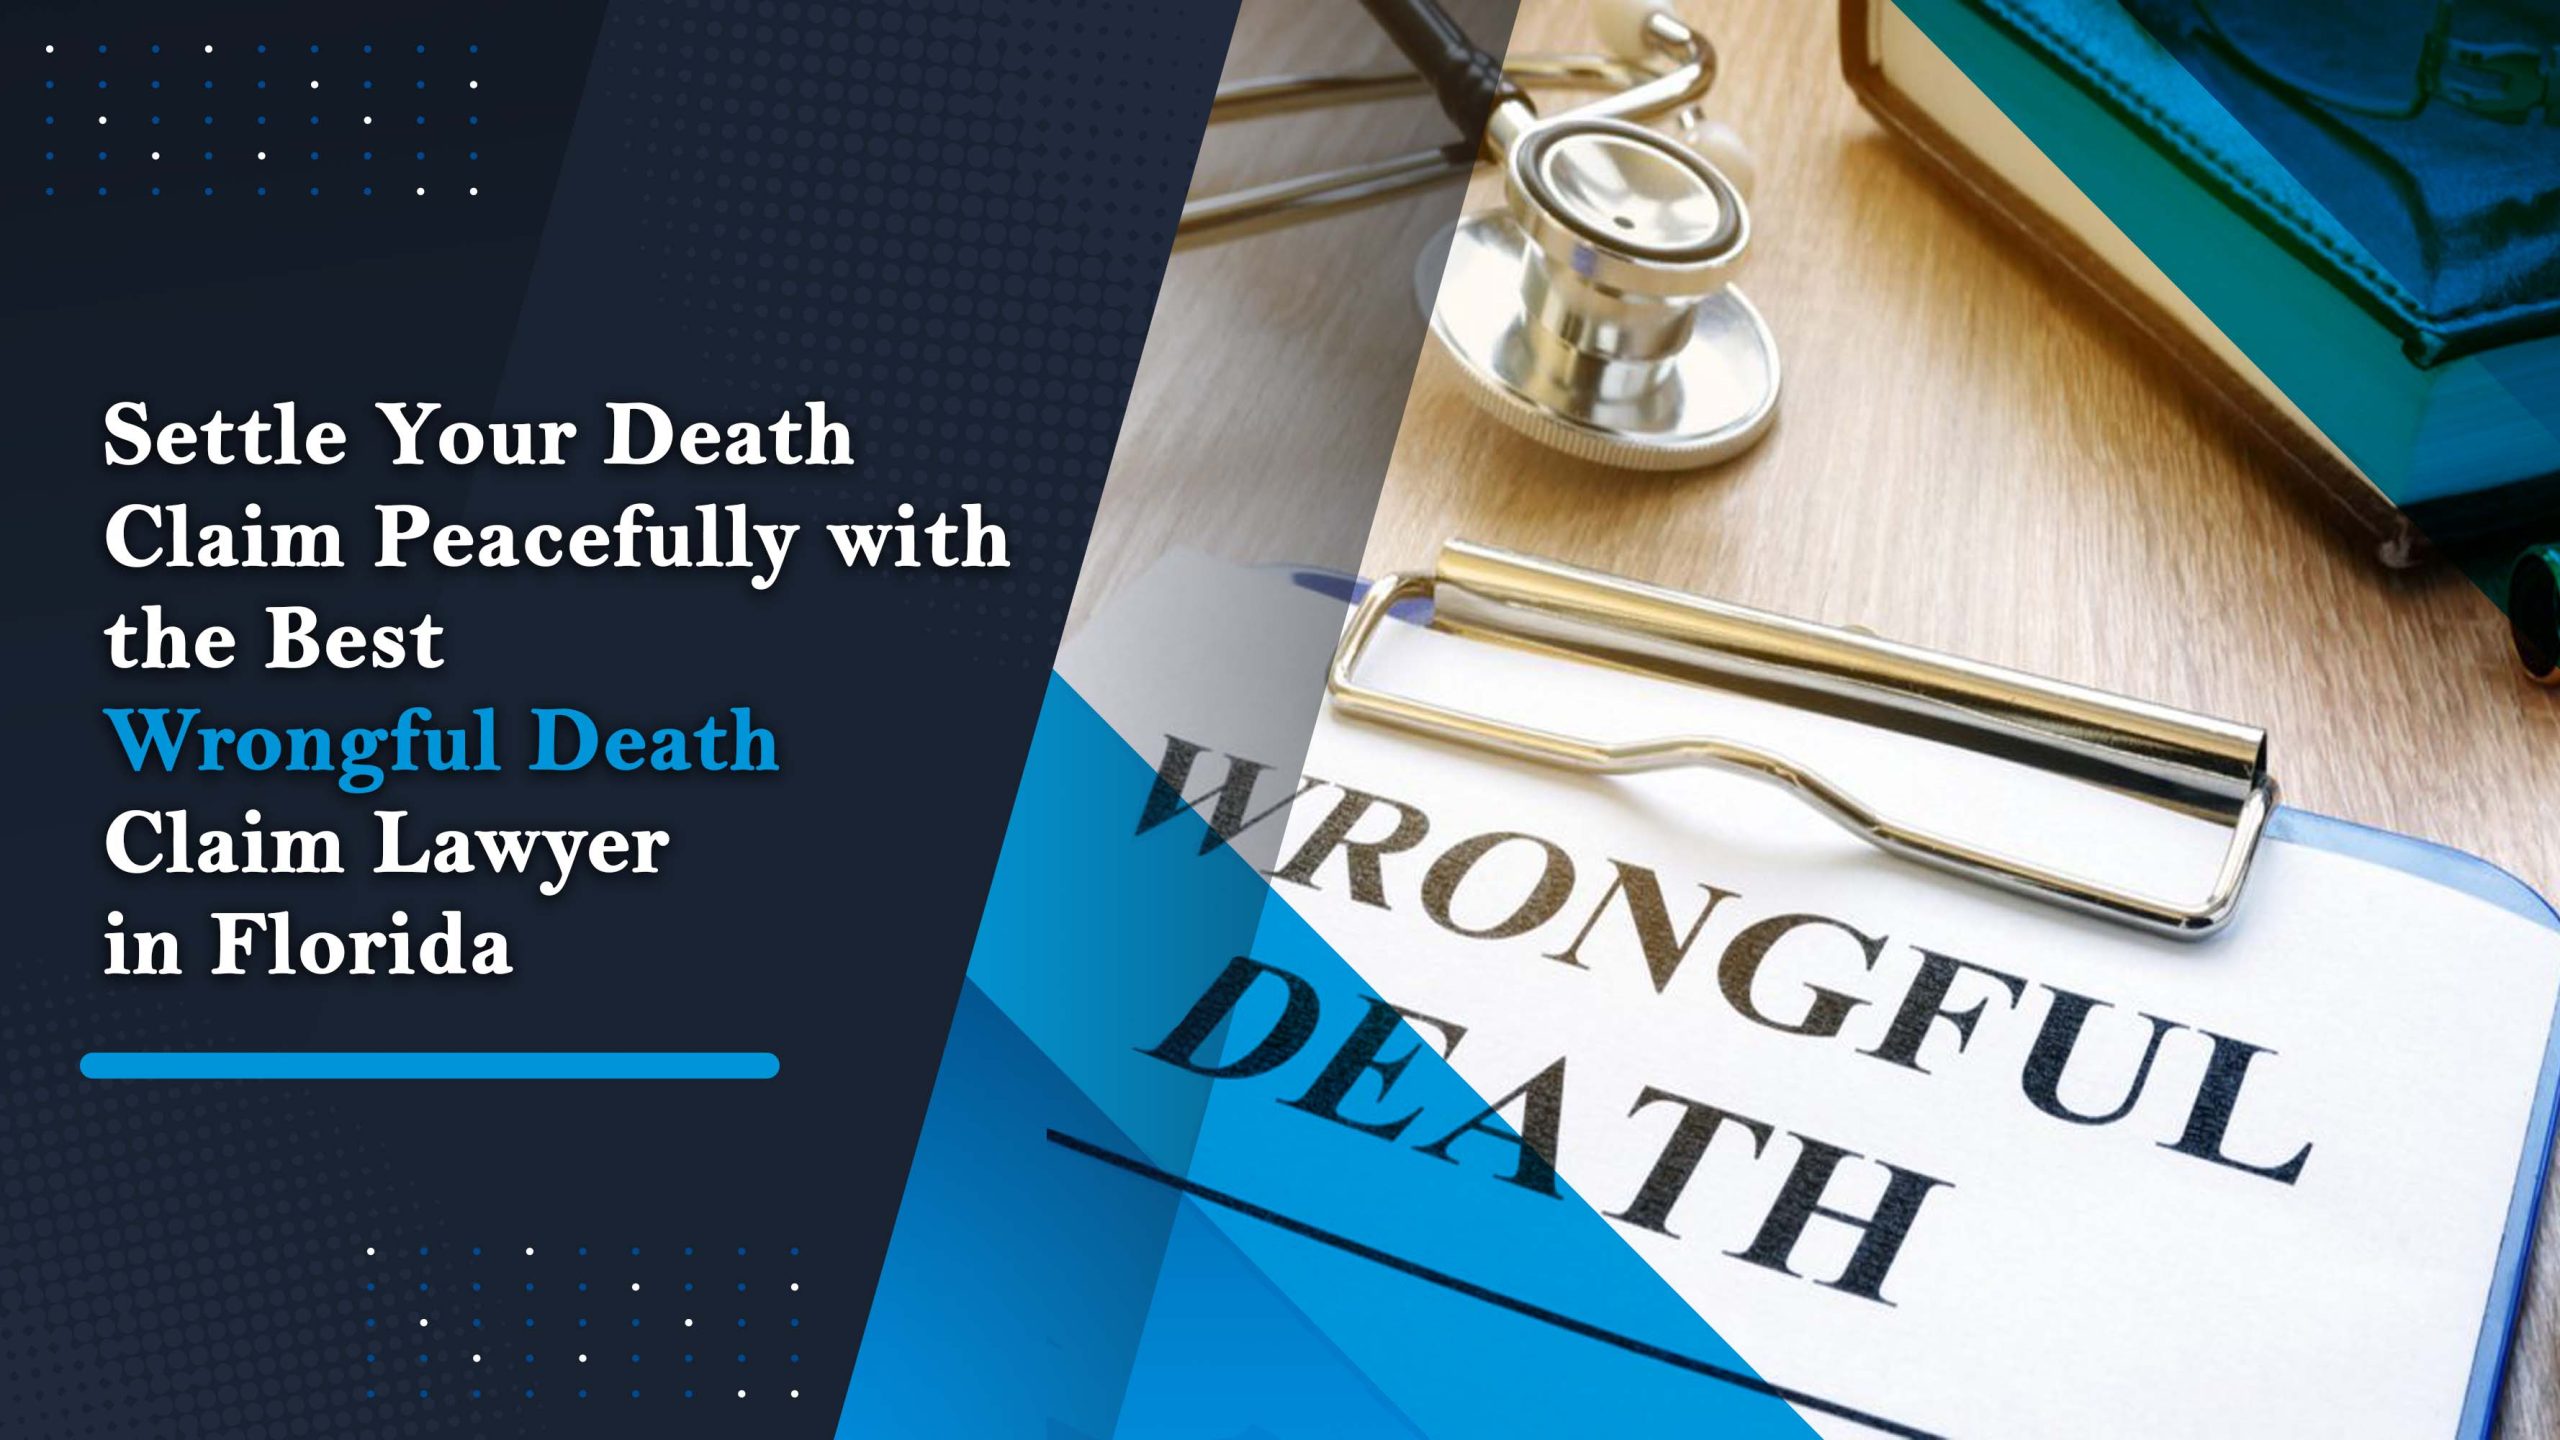 Settle Your Death Claim Peacefully with the Best Wrongful Death Claim Lawyer in Florida